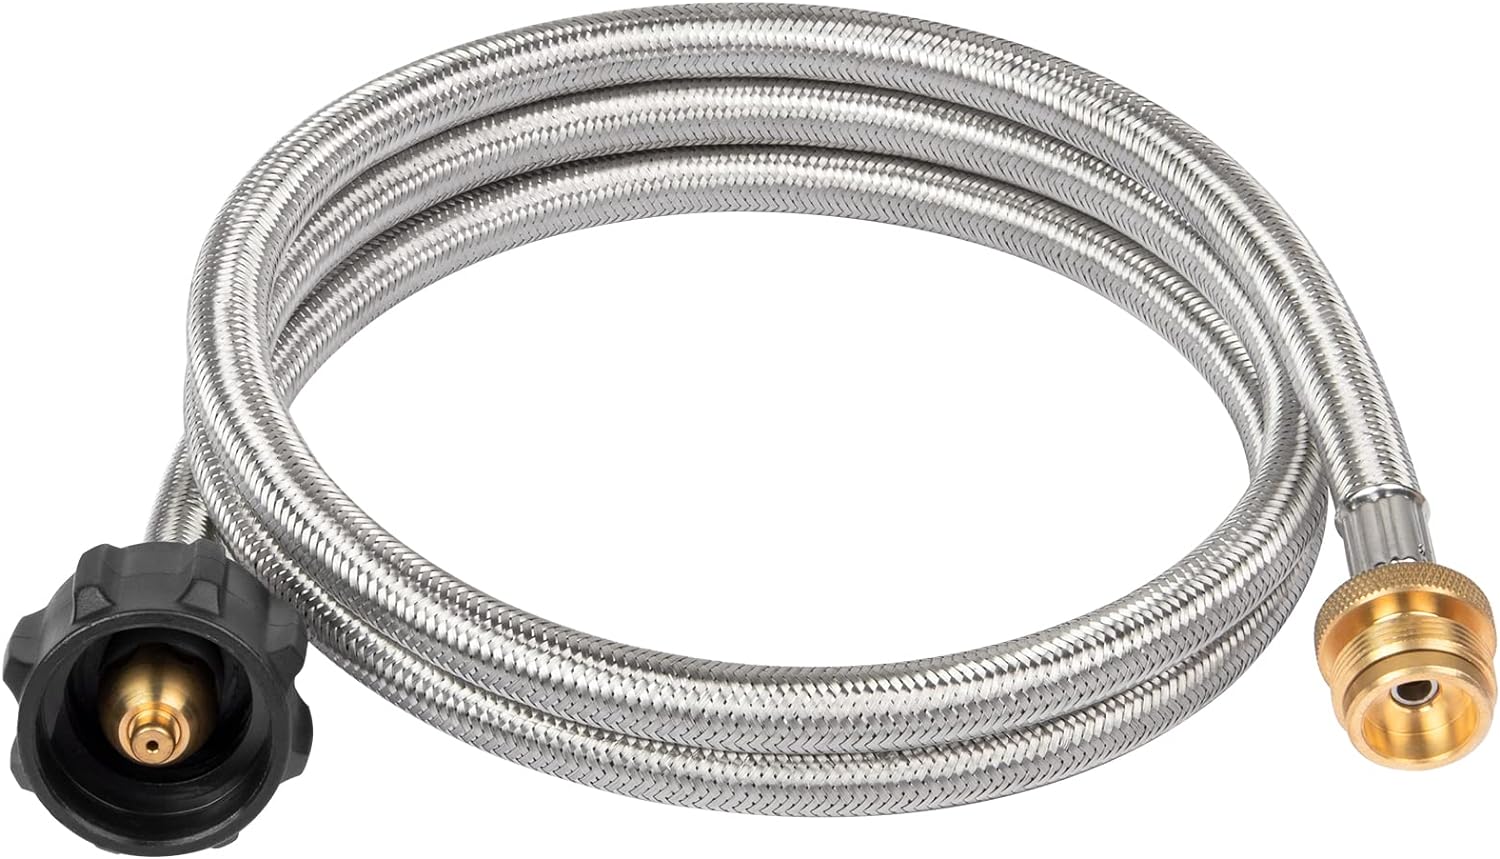 SHINESTAR Propane Adapter Hose, 12FT Propane Hose for Mr. Heater Buddy Heater, Blackstone Tabletop Griddle, Portable Propane Camping Stove and More, Connects to 5-40 lb Propane Tank - SHINESTAR Propane Adapter Hose Review